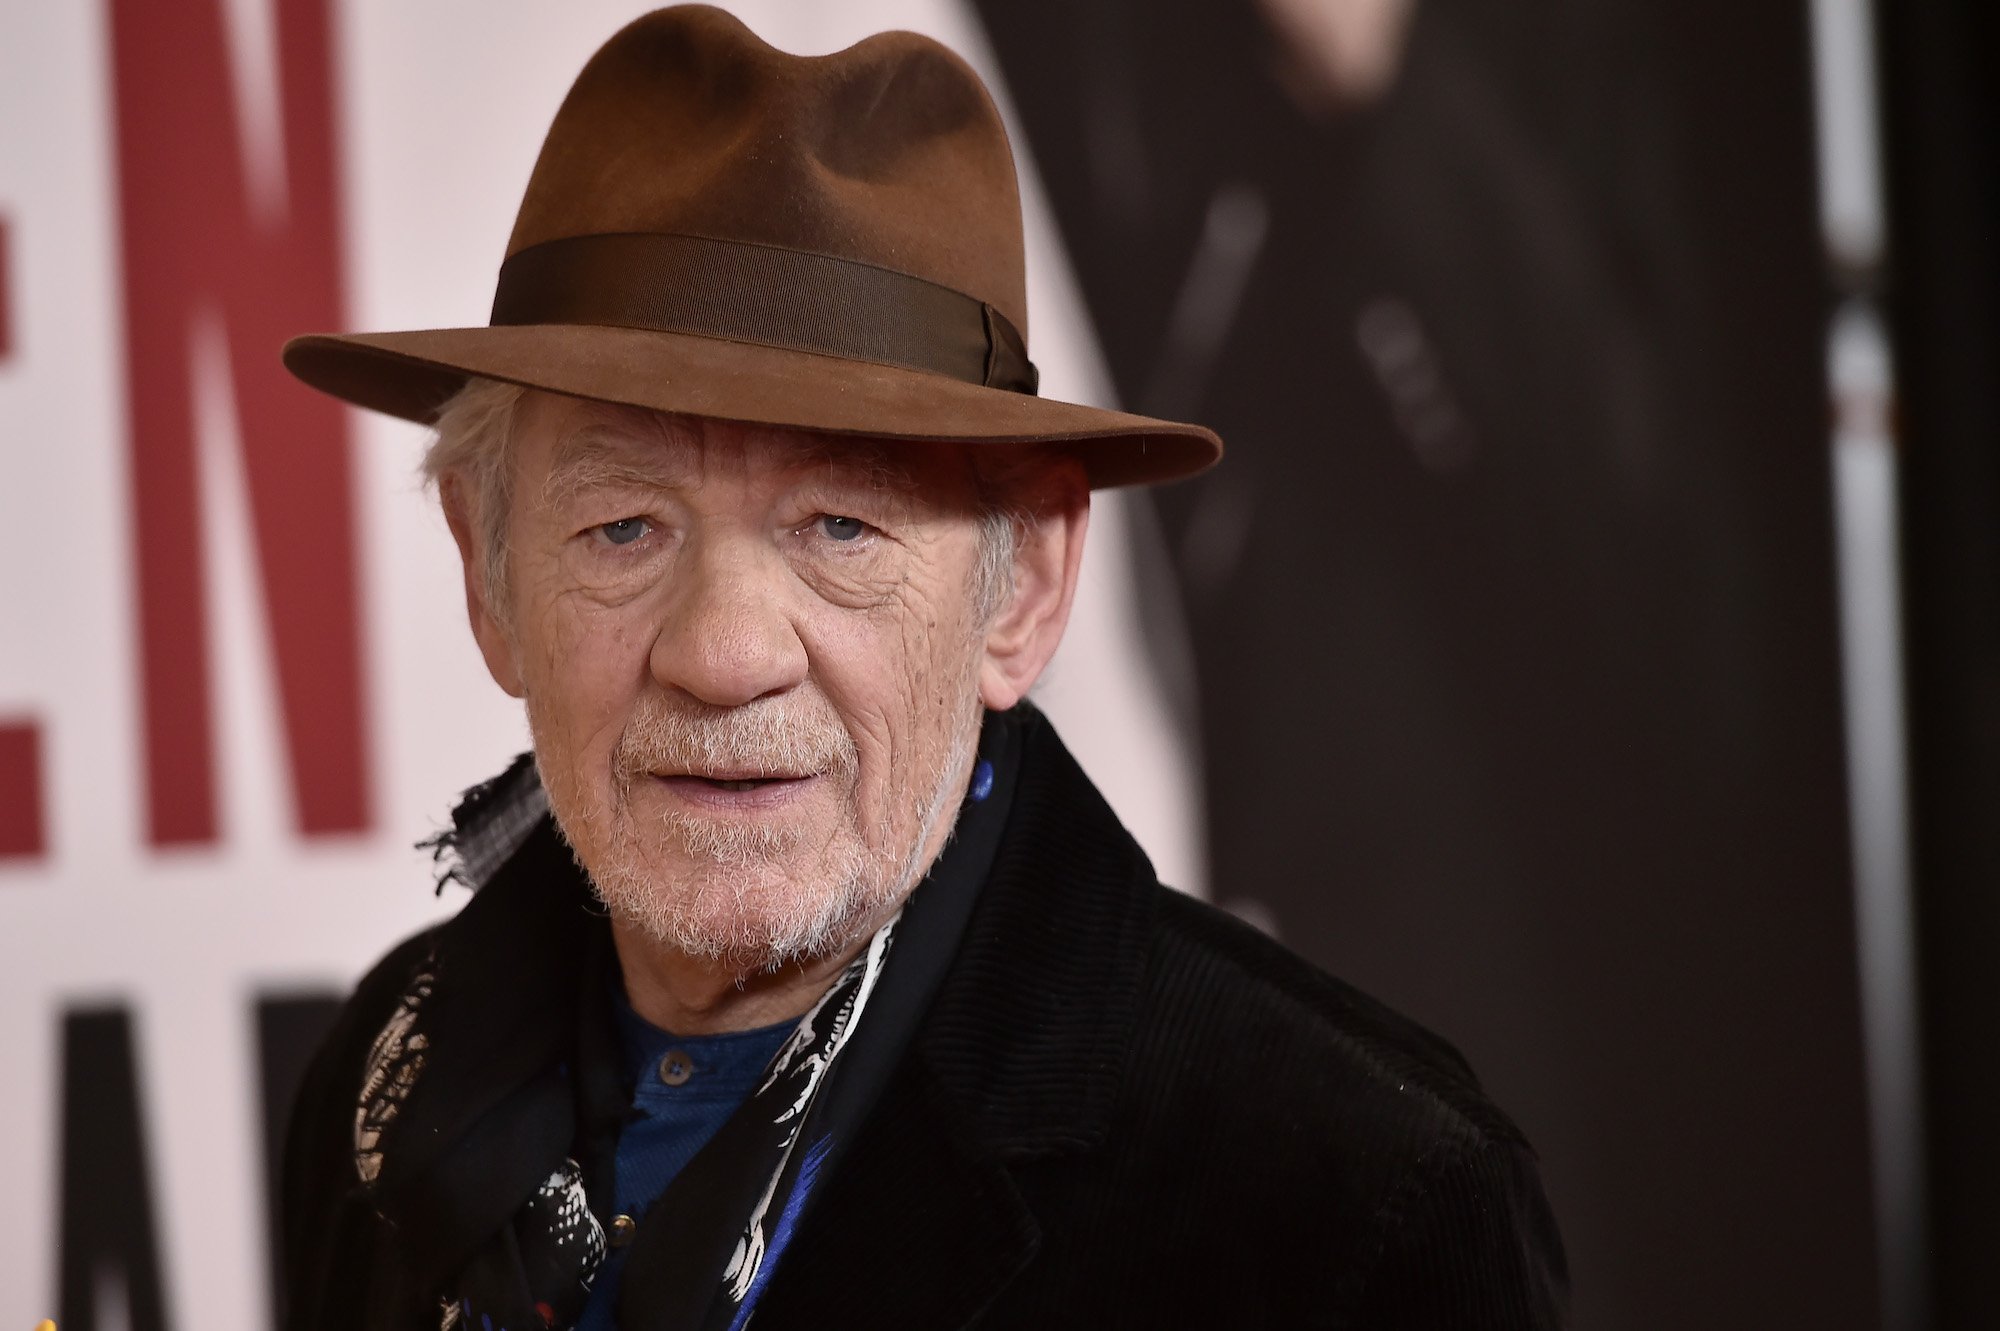 Sir Ian McKellen looking at the camera in front of a blurred background, wearing a brown hat